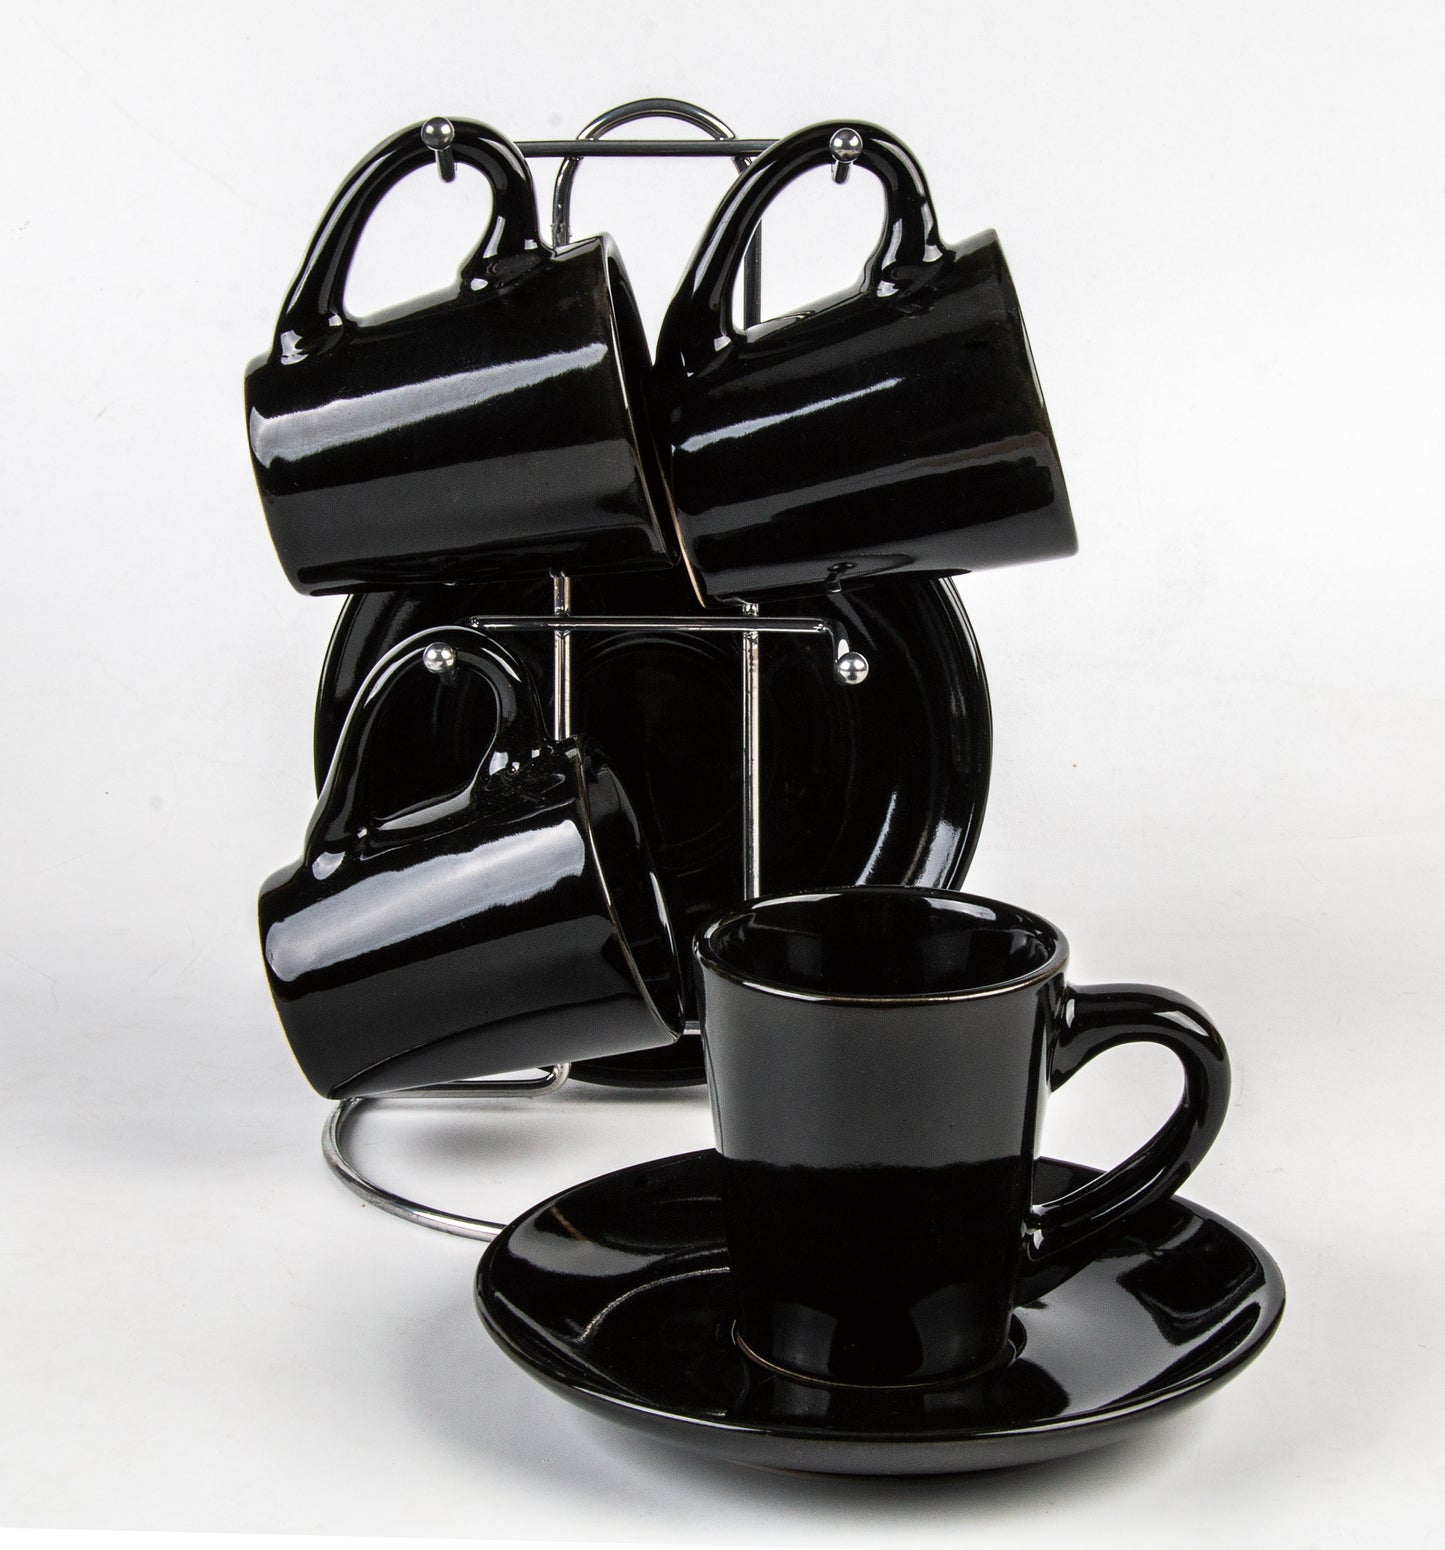 Bene Casa Espresso Coffee Maker with 2 Cups and Saucers Set